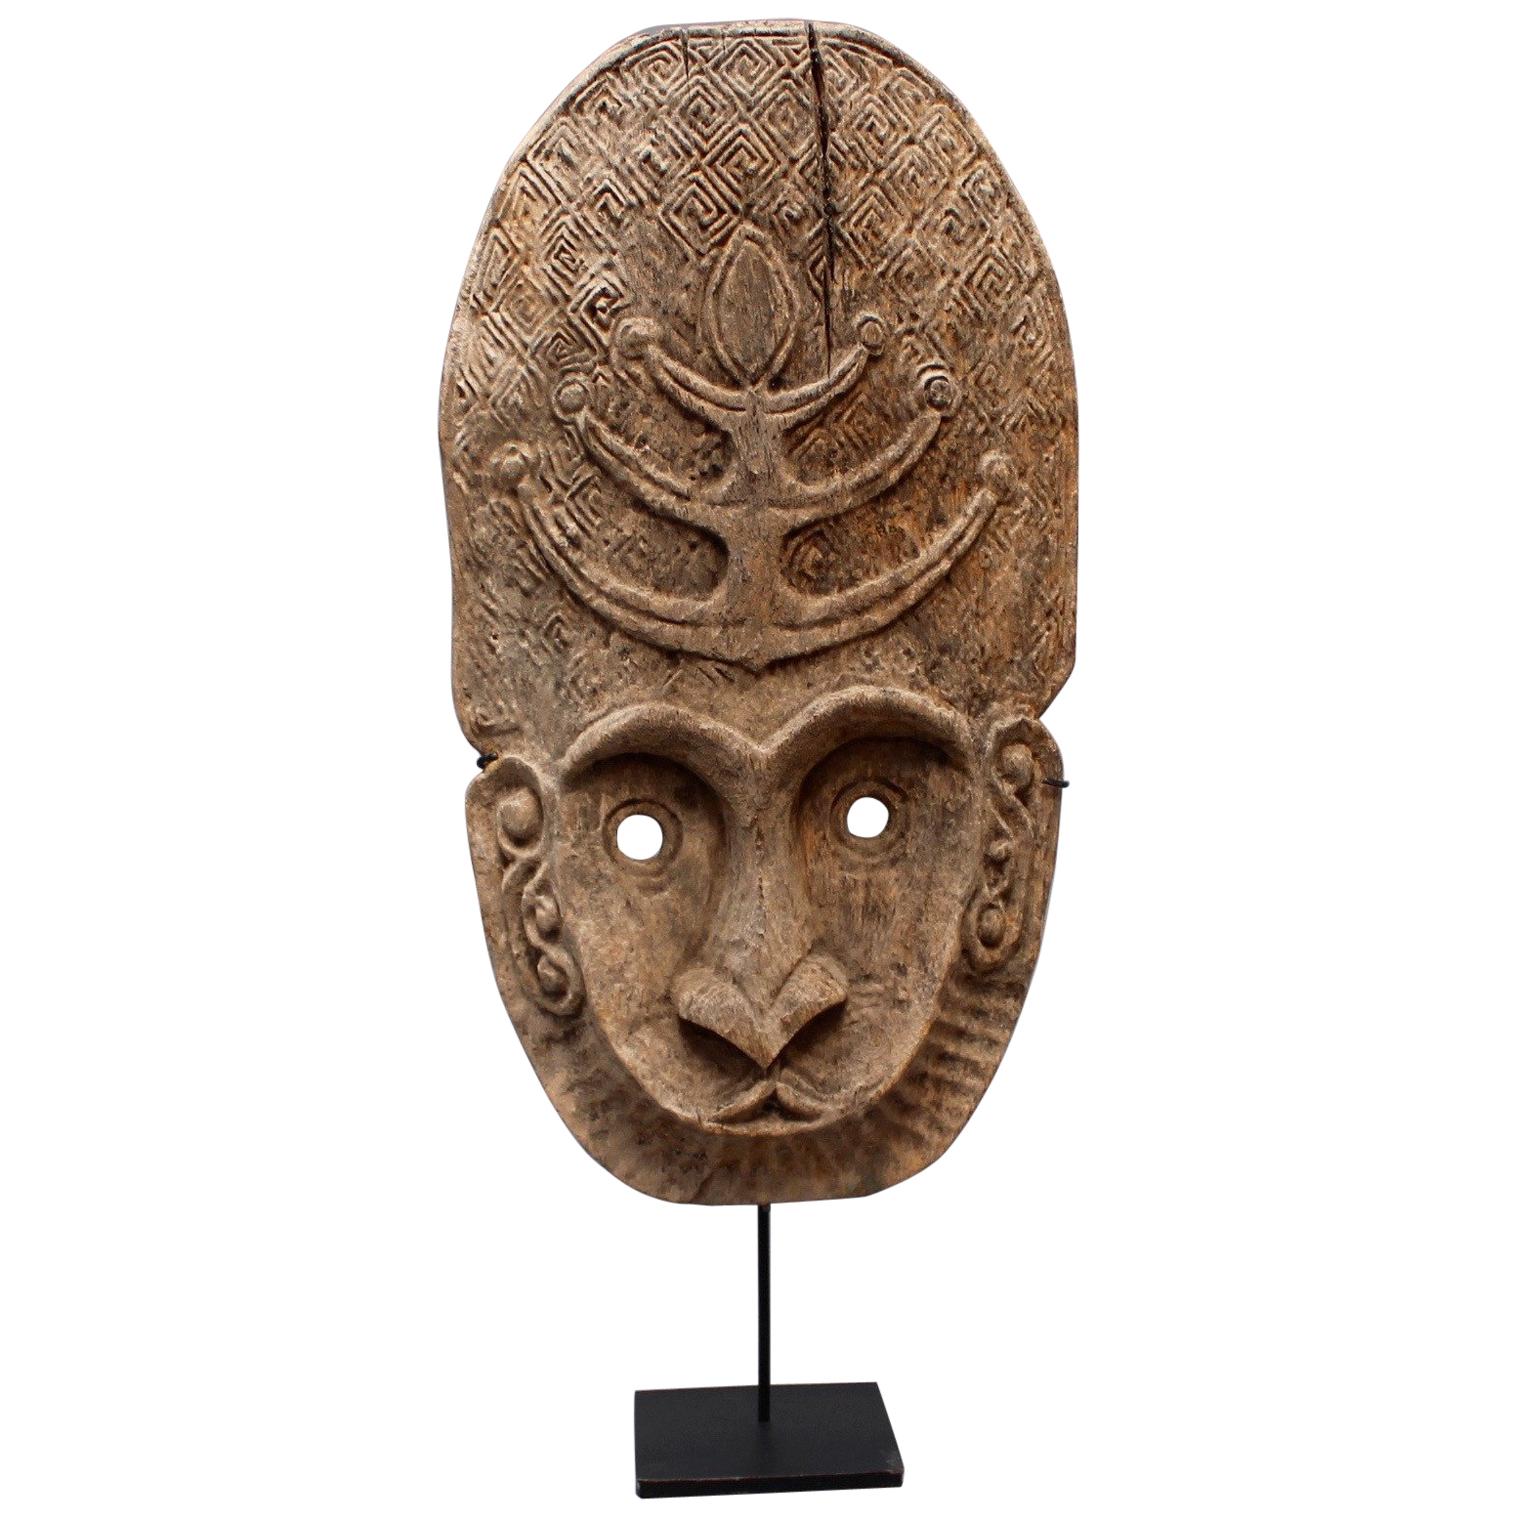 Timor Island Wooden Traditional Mask, Early 20th Century